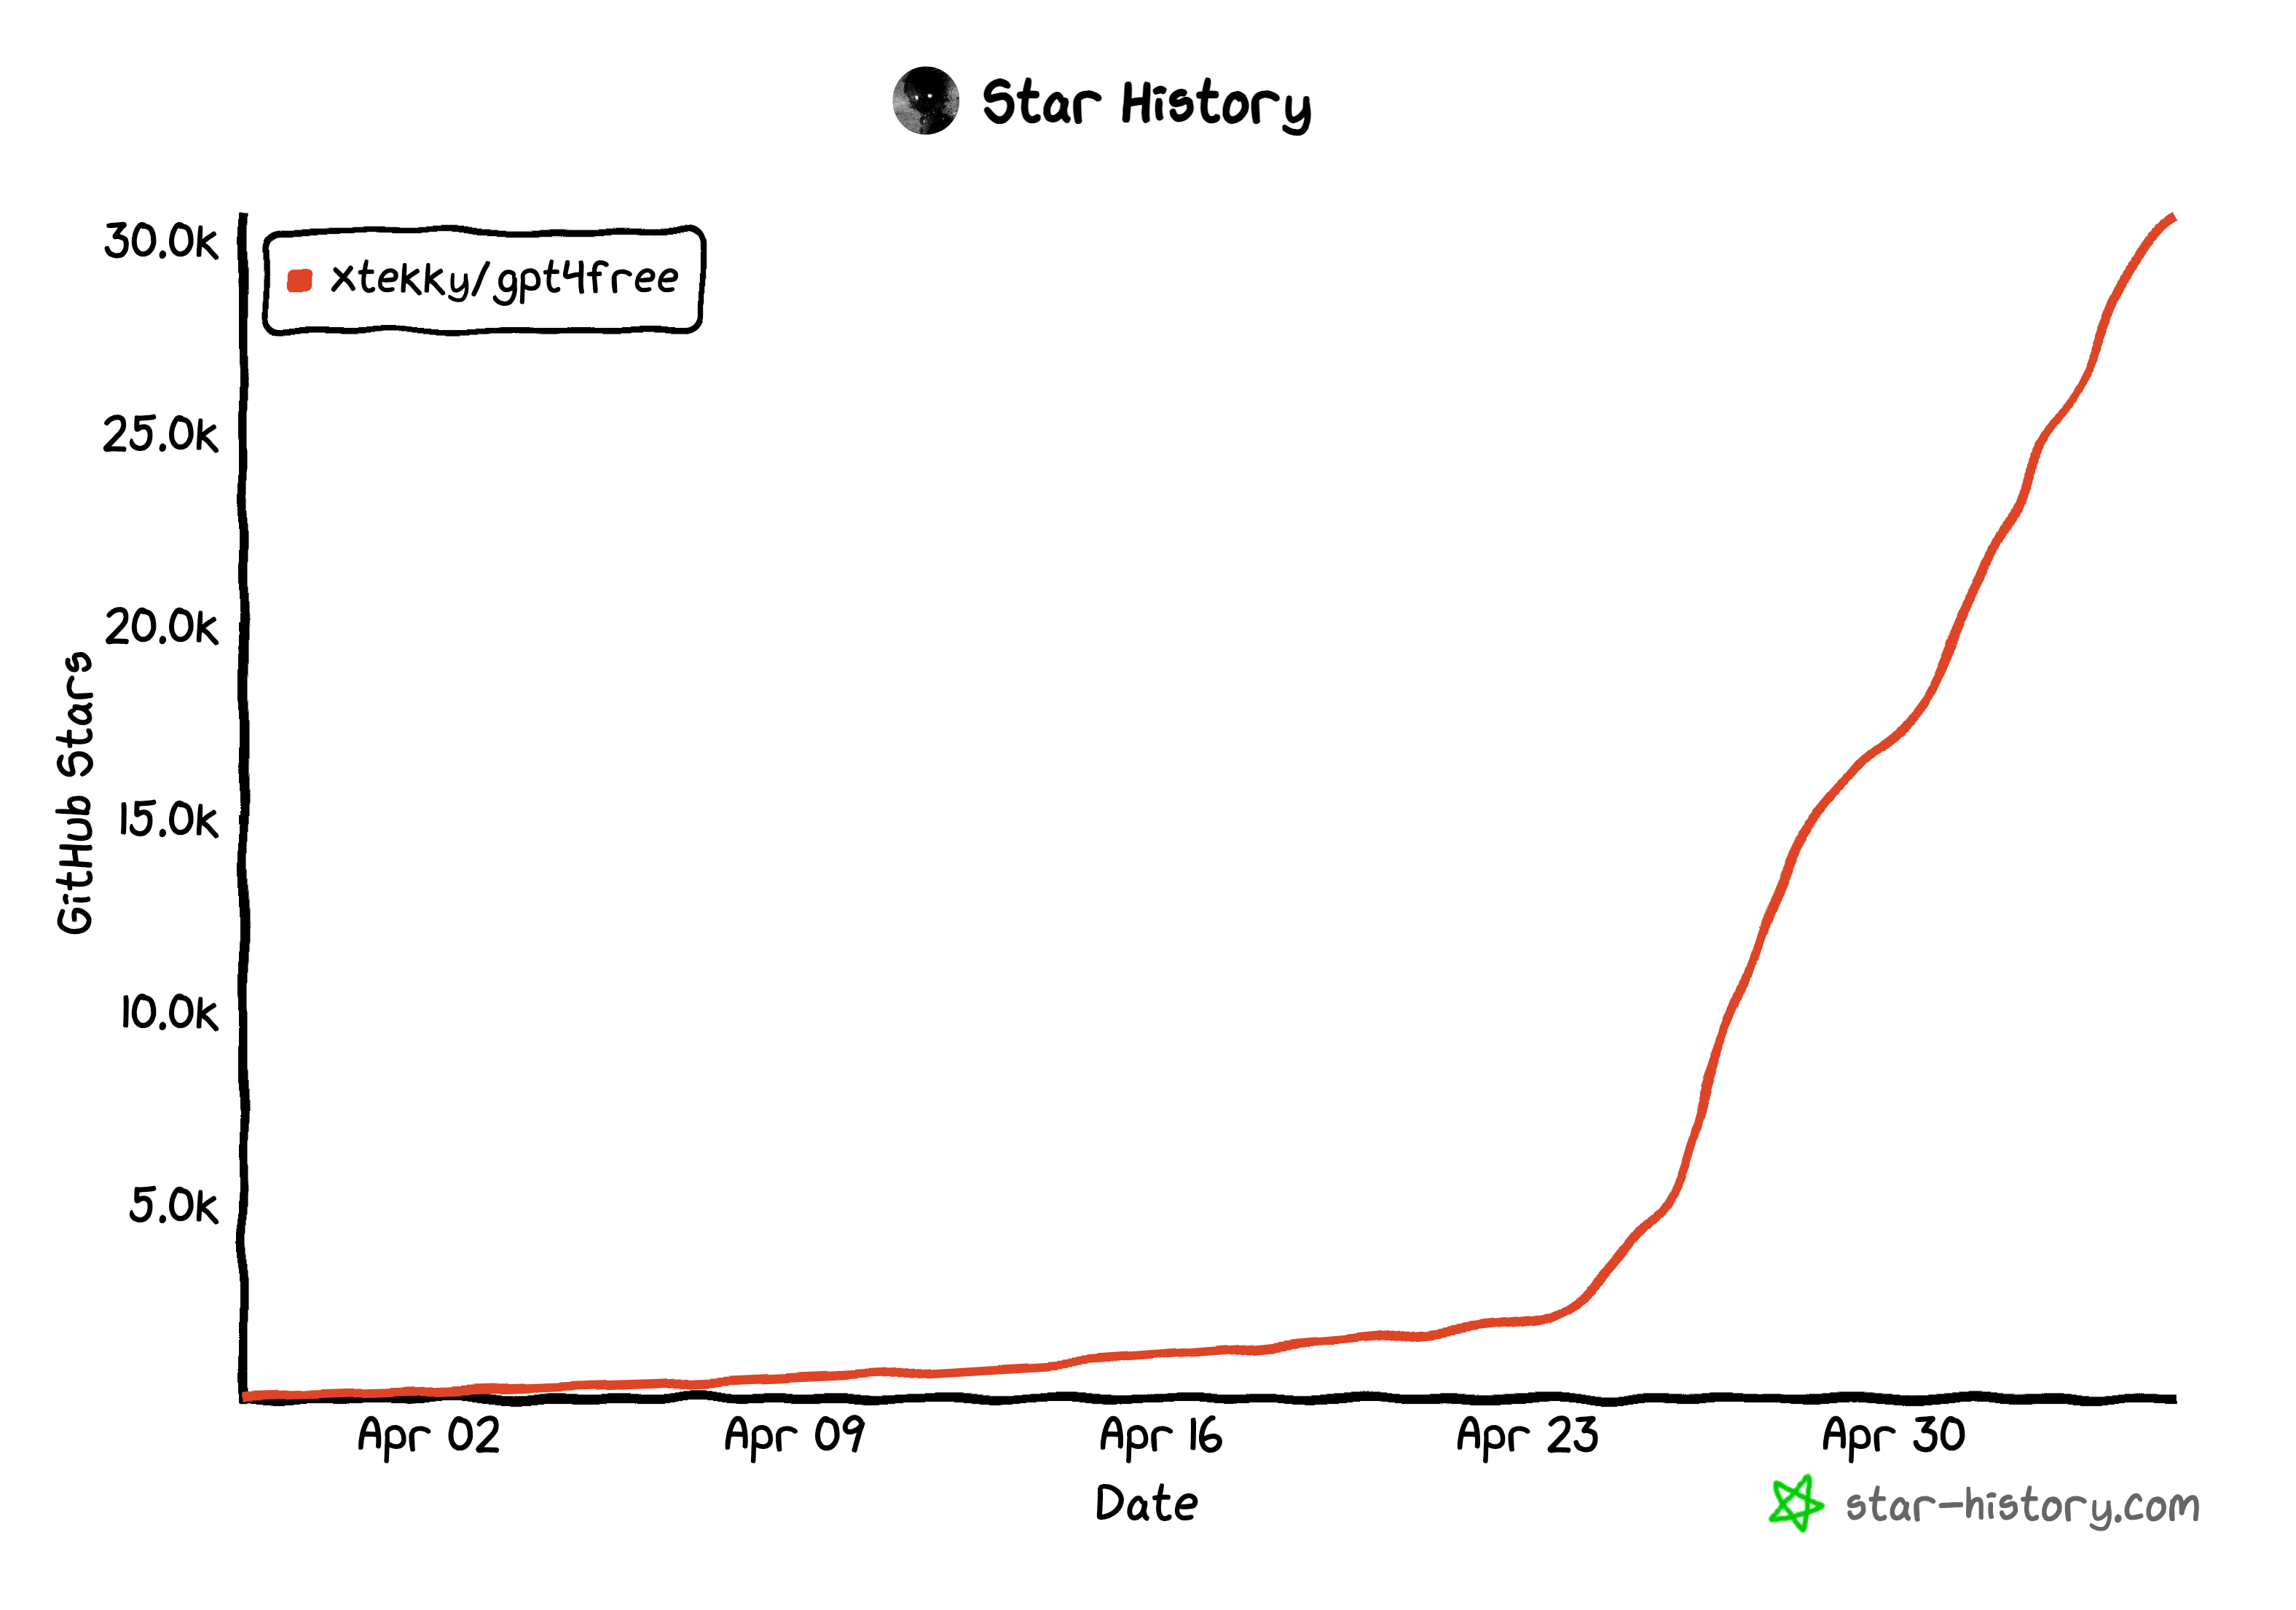 A b/w x/y axis chart with stars as the y-axis and dates in April as the x-axis, showing a red line steeply rising after April 23 and reaching 30,000 stars by April 30 